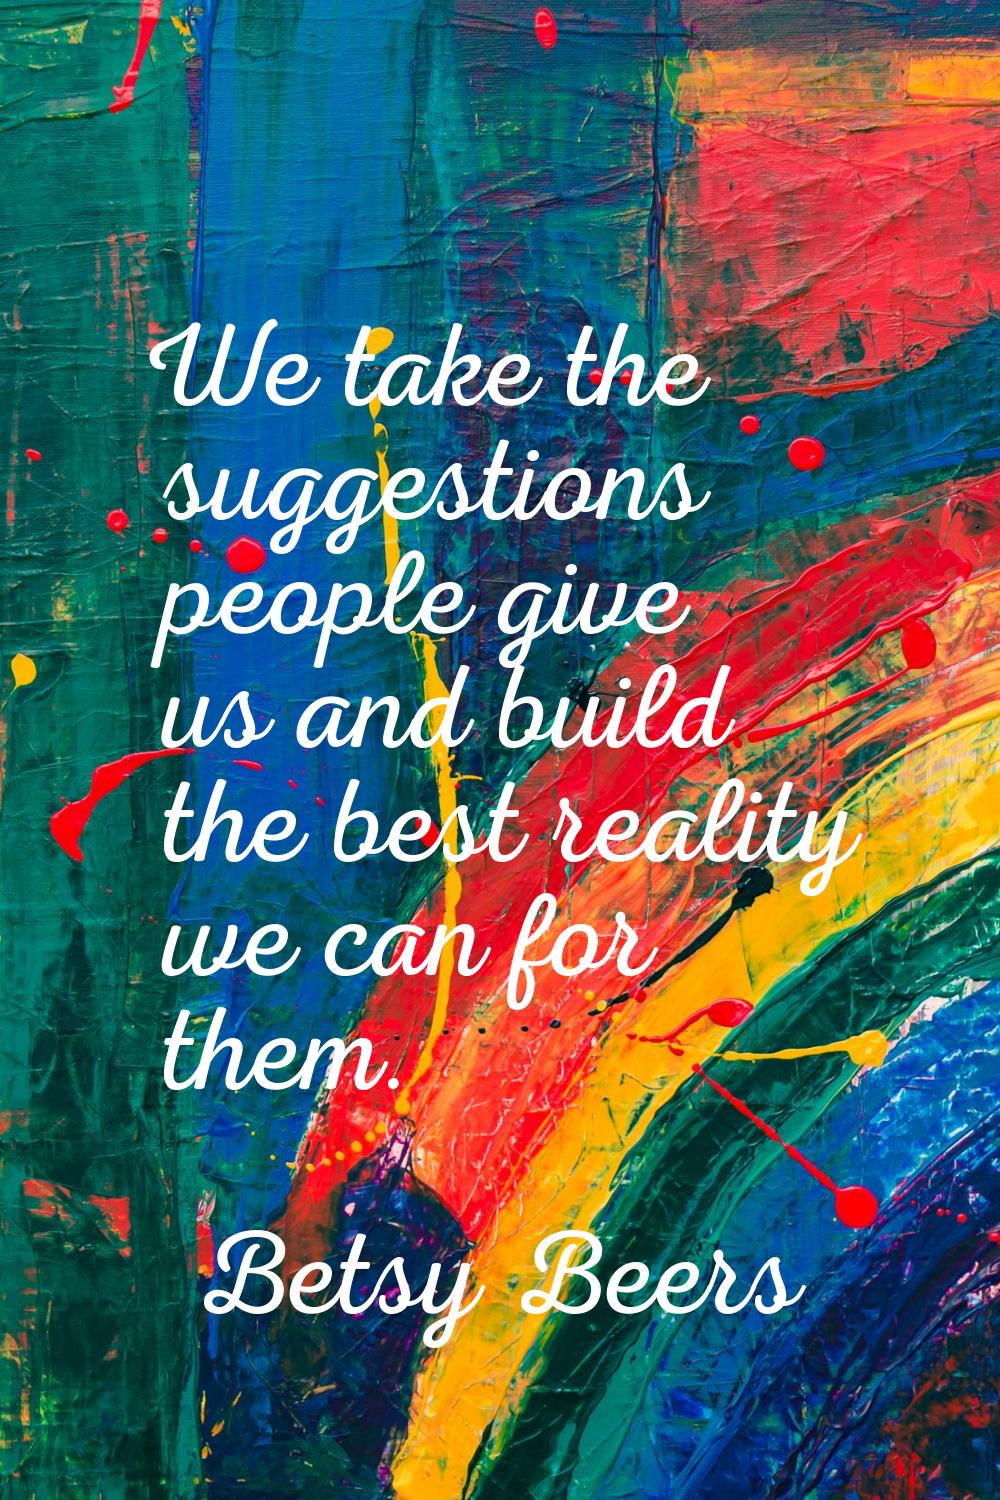 We take the suggestions people give us and build the best reality we can for them.